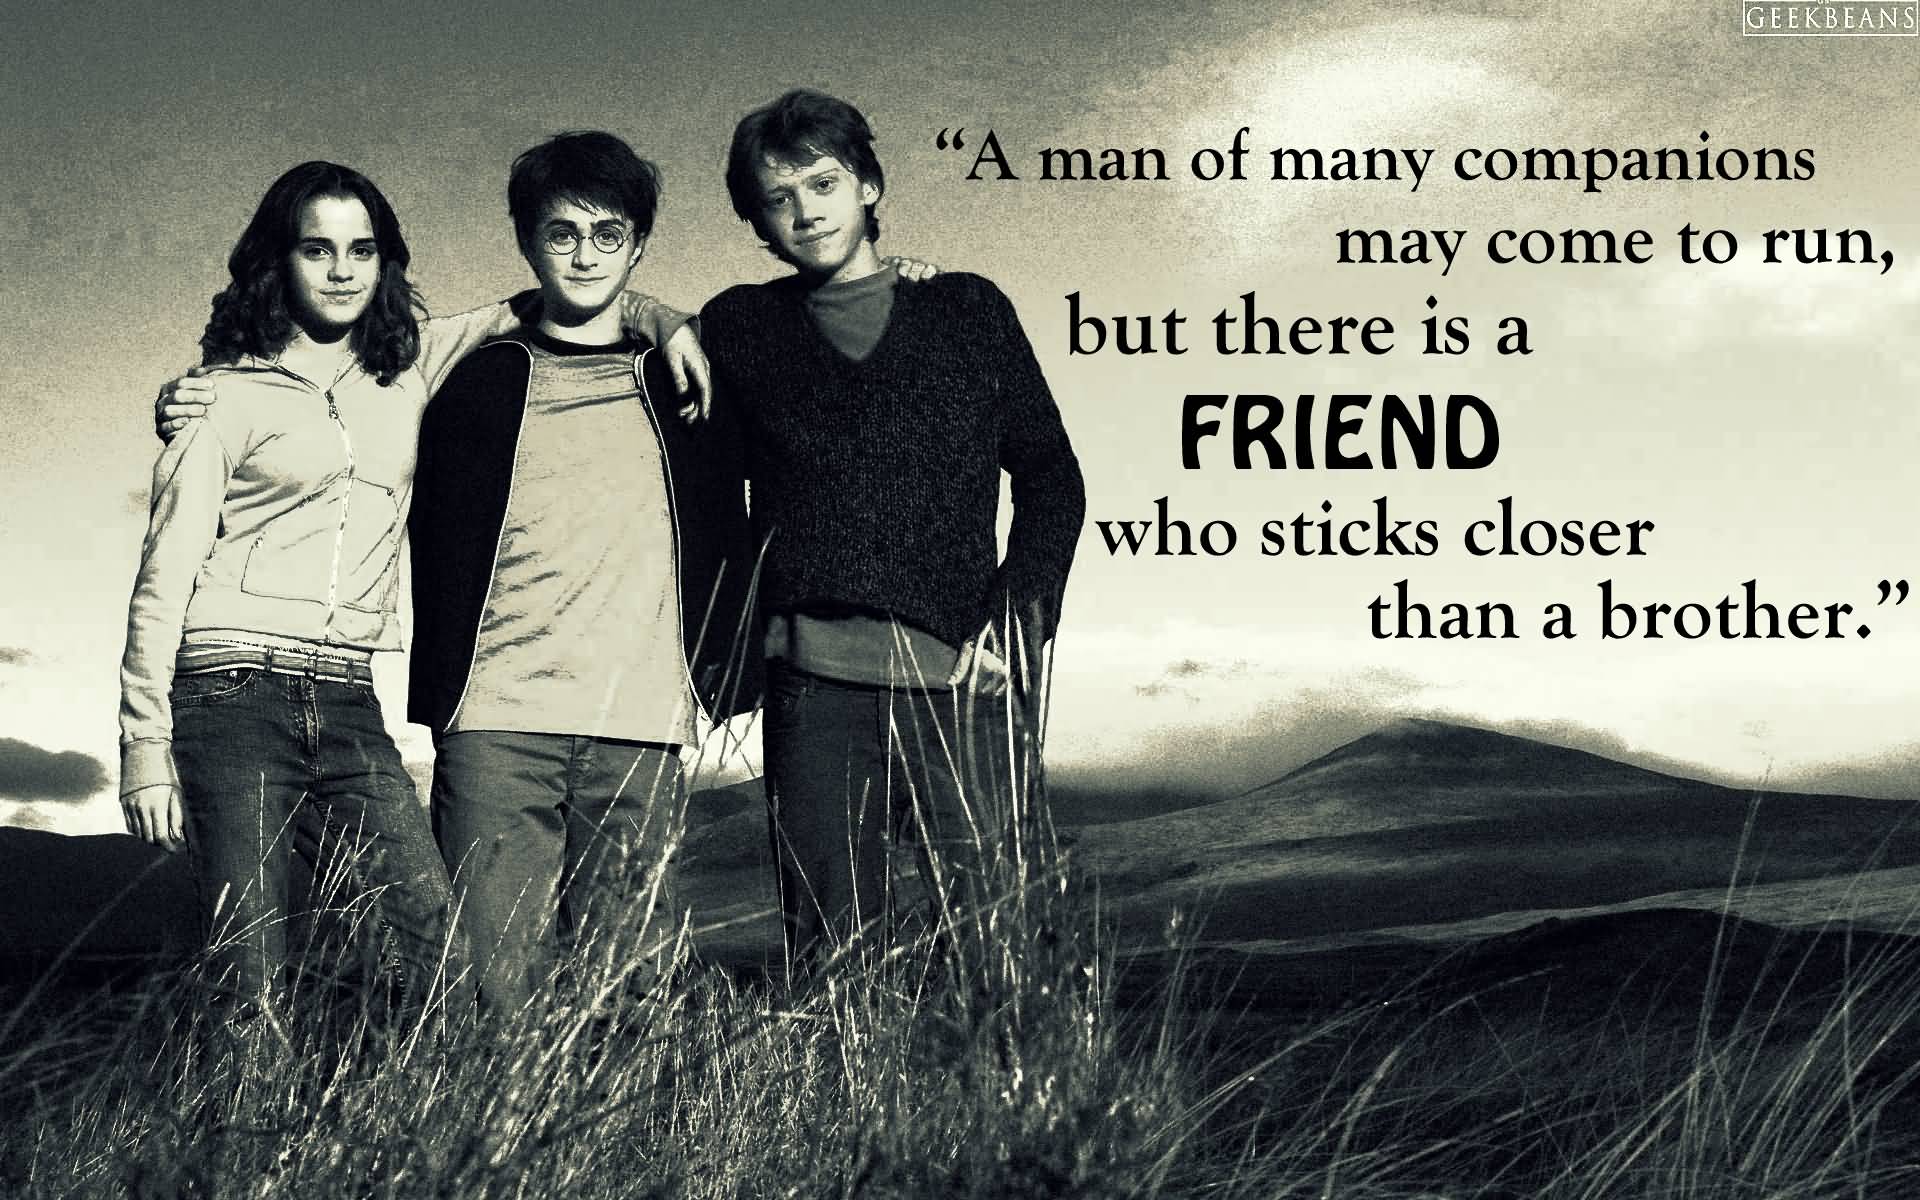 Harry Potter Quote About Friendship 05